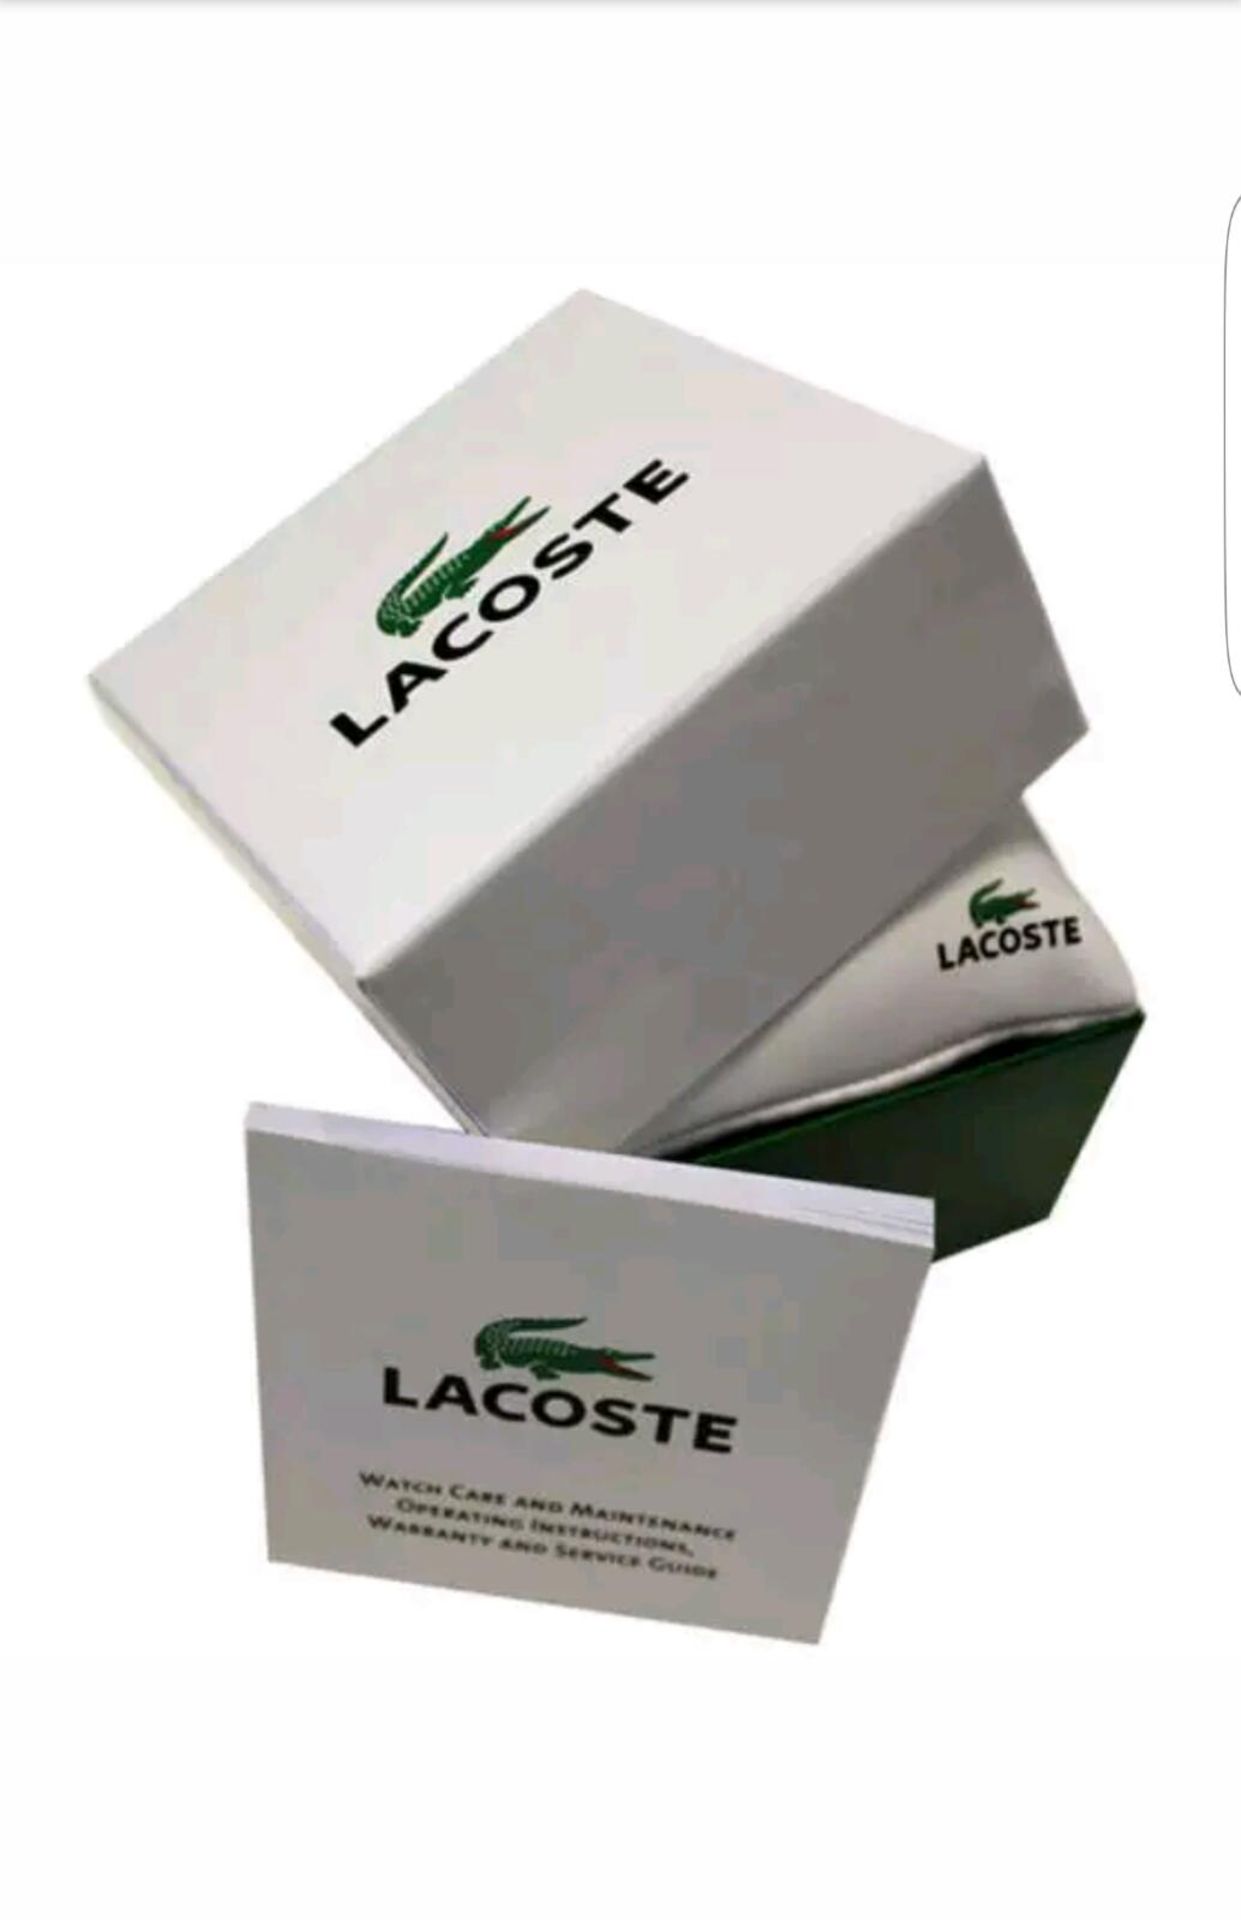 BRAND NEW LACOSTE LADIES ACAPULCO STAINLESS STEEL WATCH 2000814, COMPLETE WITH ORIGINAL BOX AND - Image 2 of 2